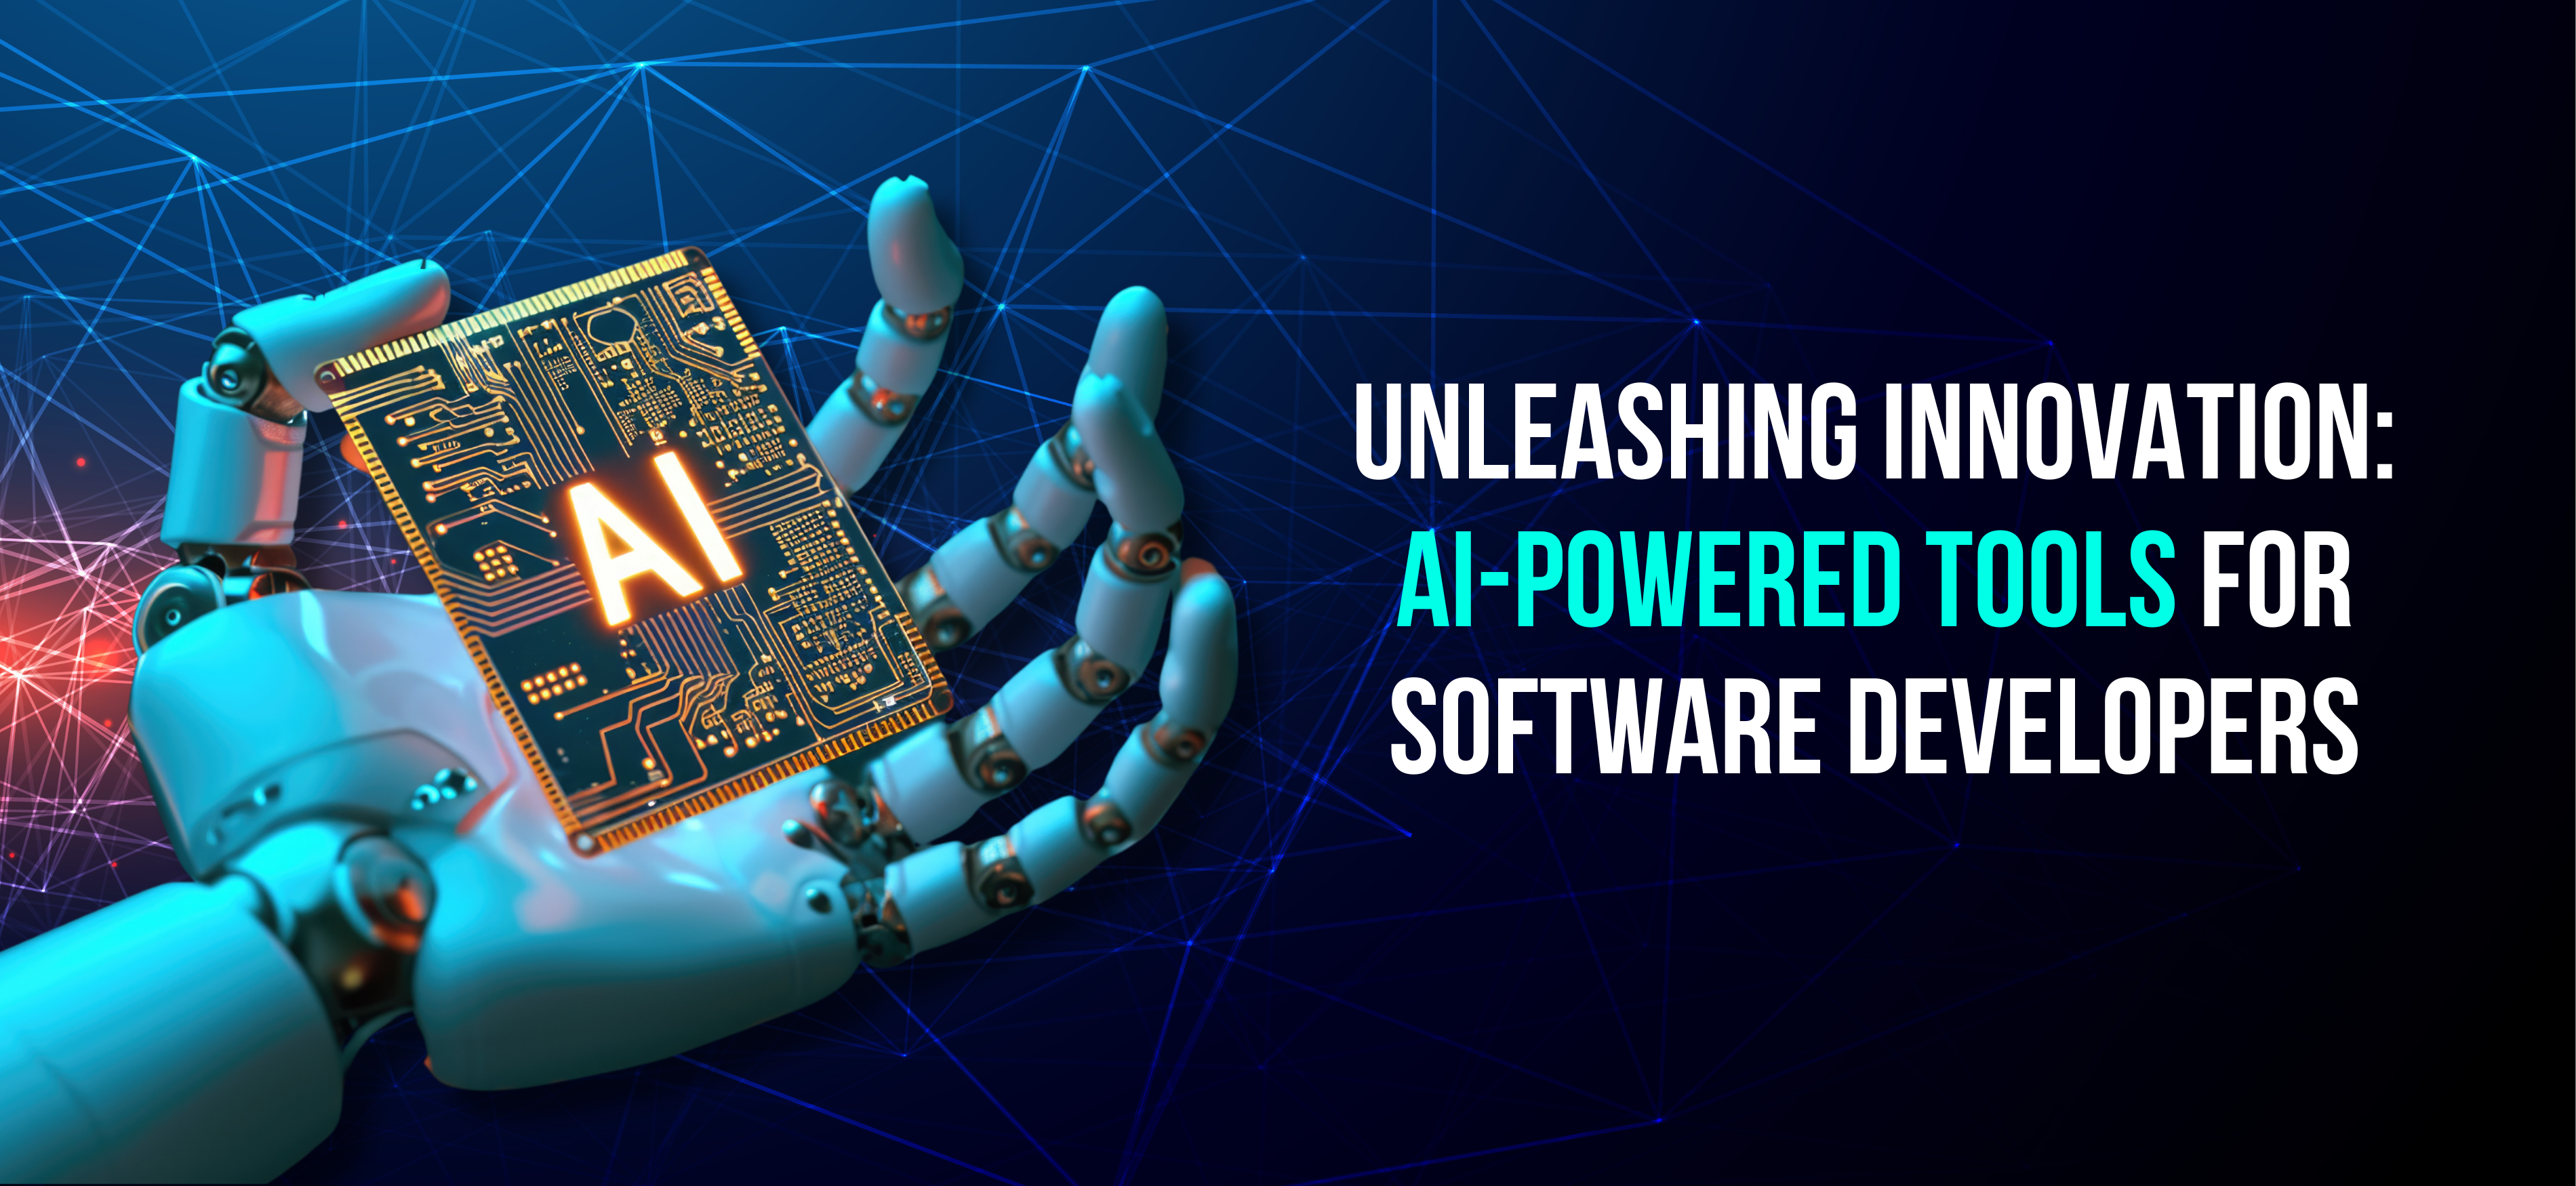 Unleashing Innovation: AI-Powered Tools for Software Developers - Internet Soft